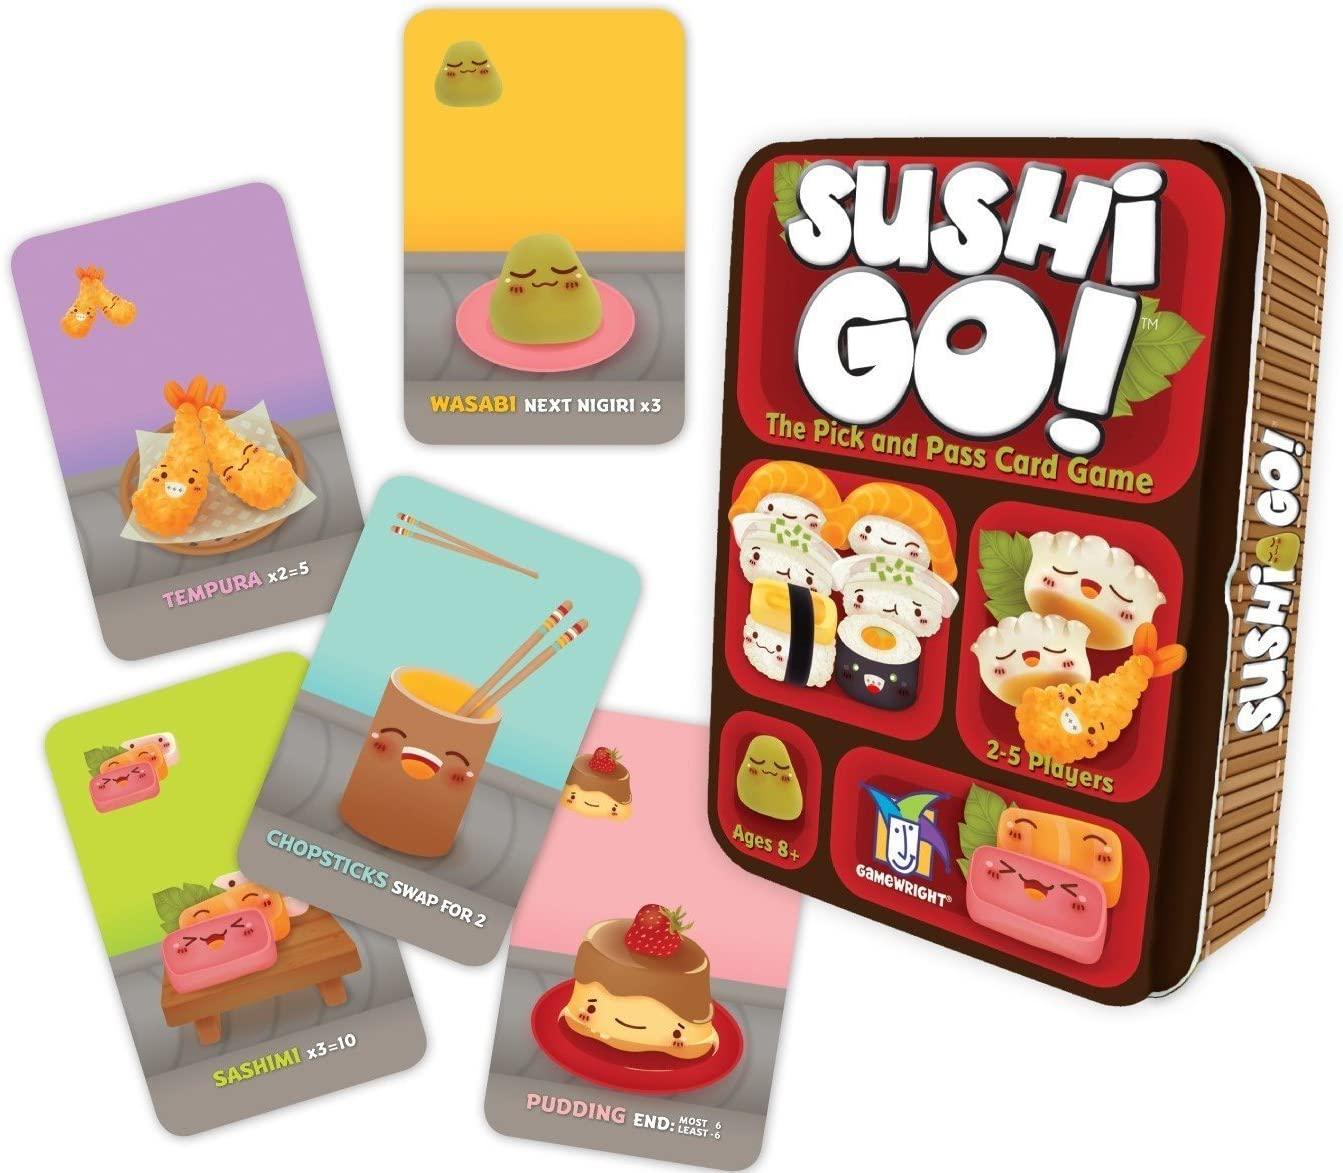 Sushi Go The Pick and Pass Card Game for $4.72